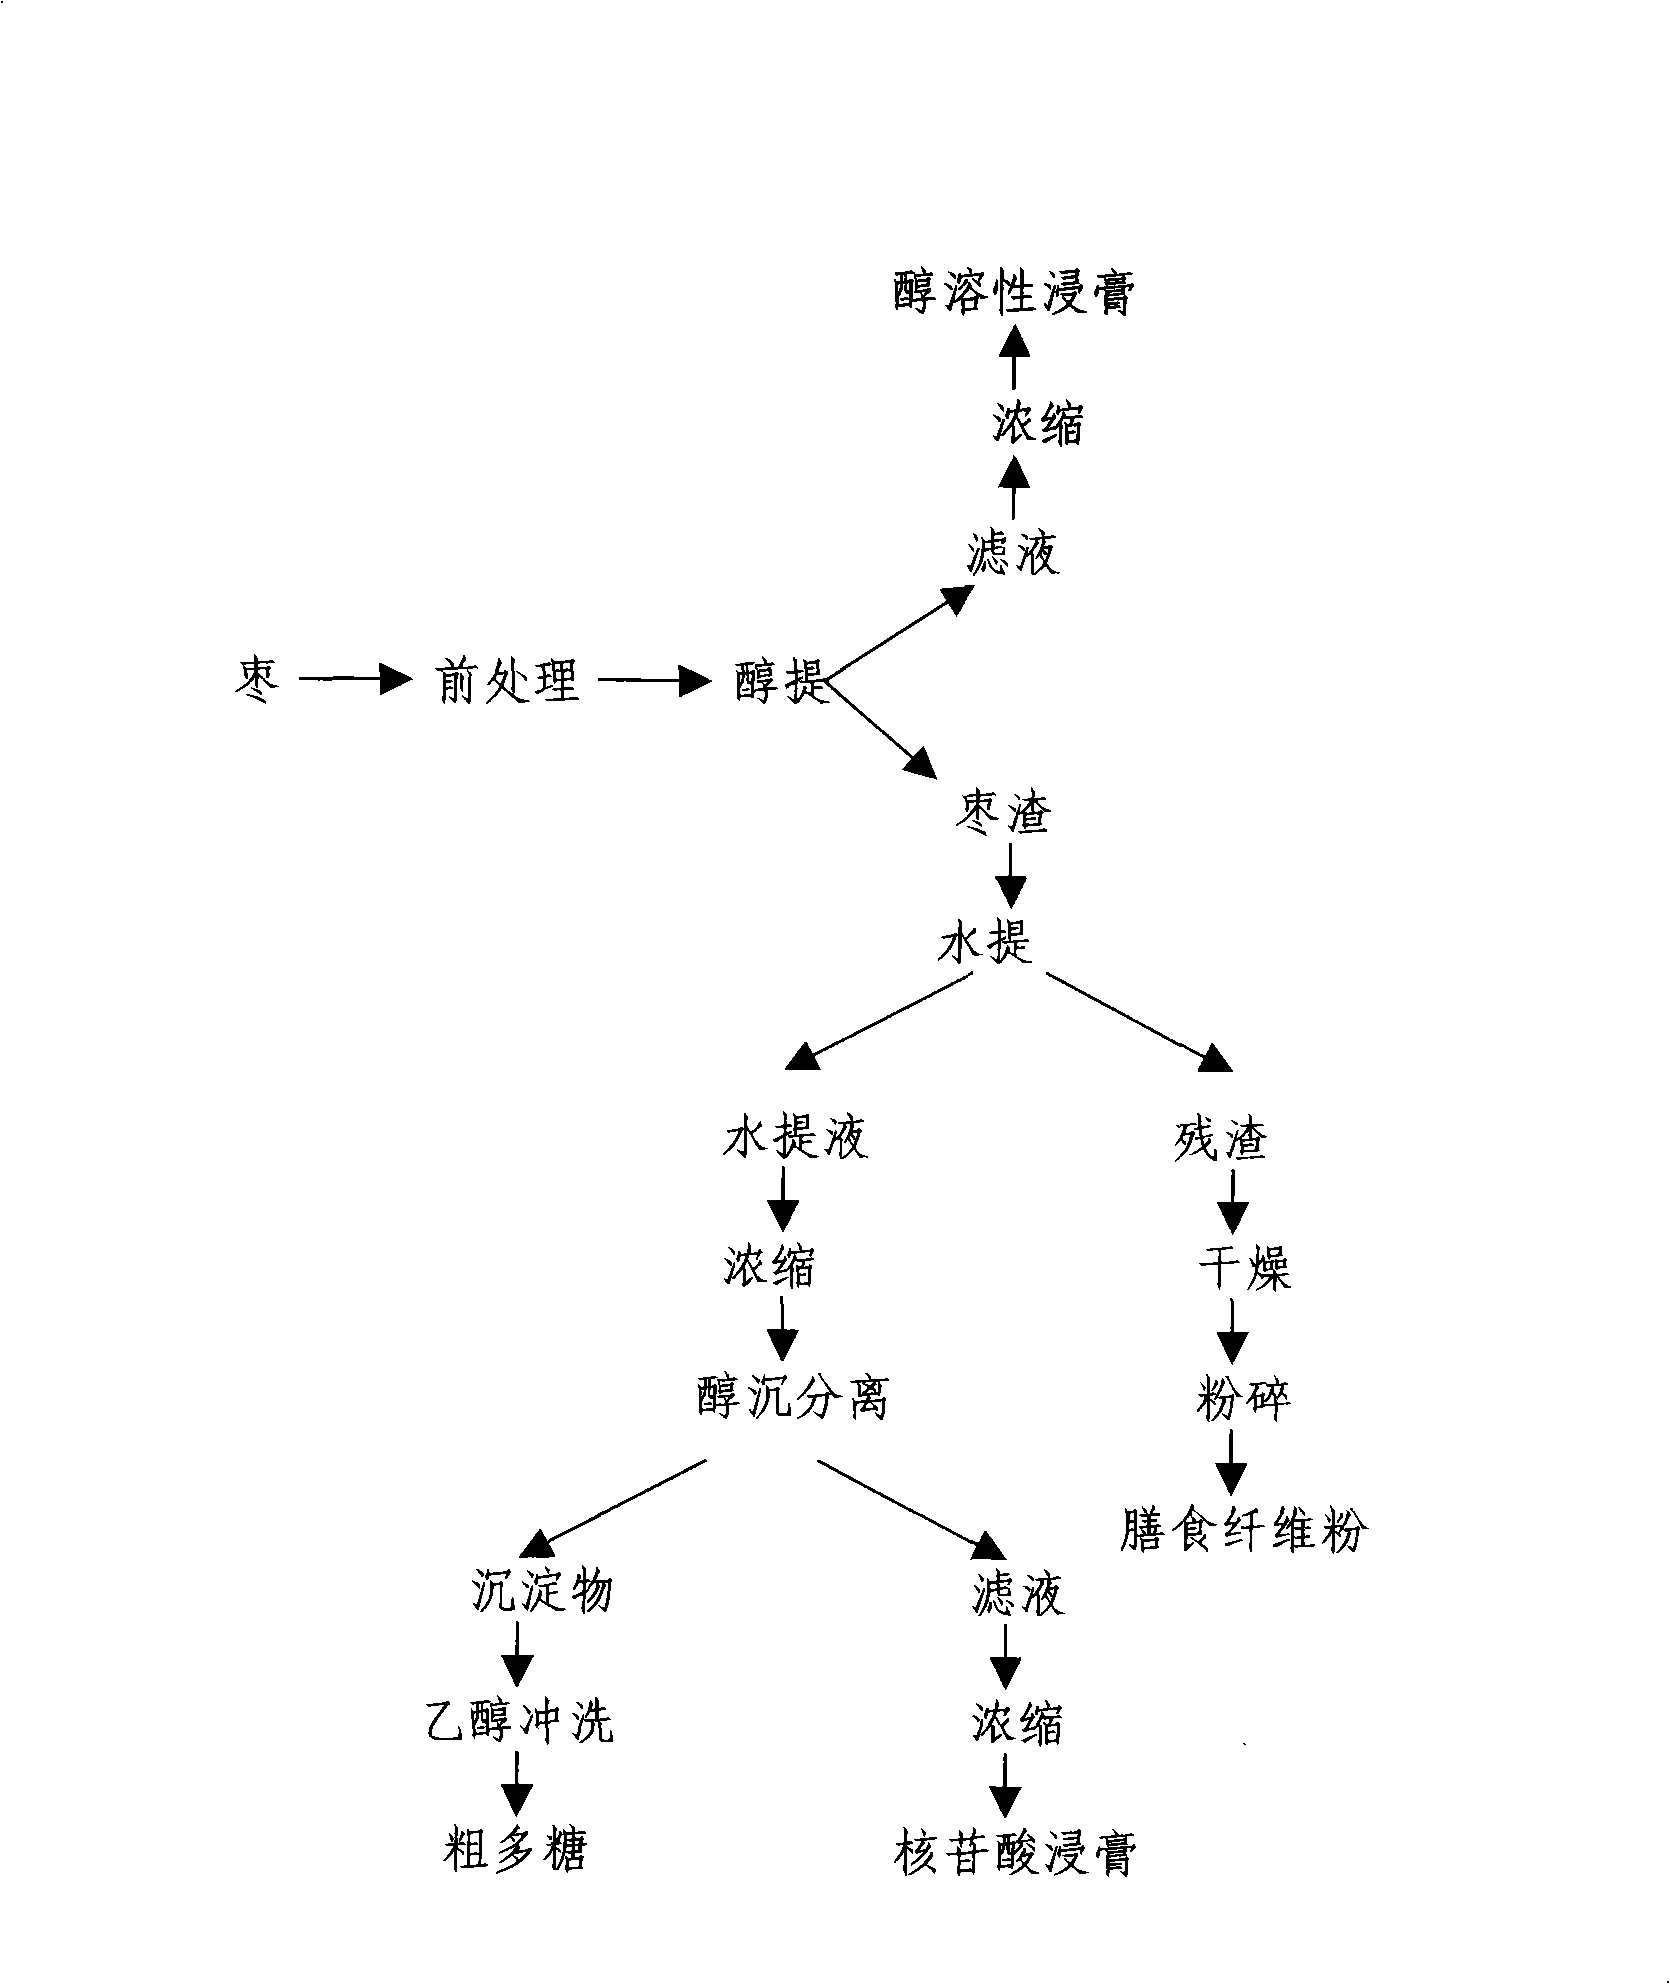 Method of sequential extraction of biological activity component from jujube